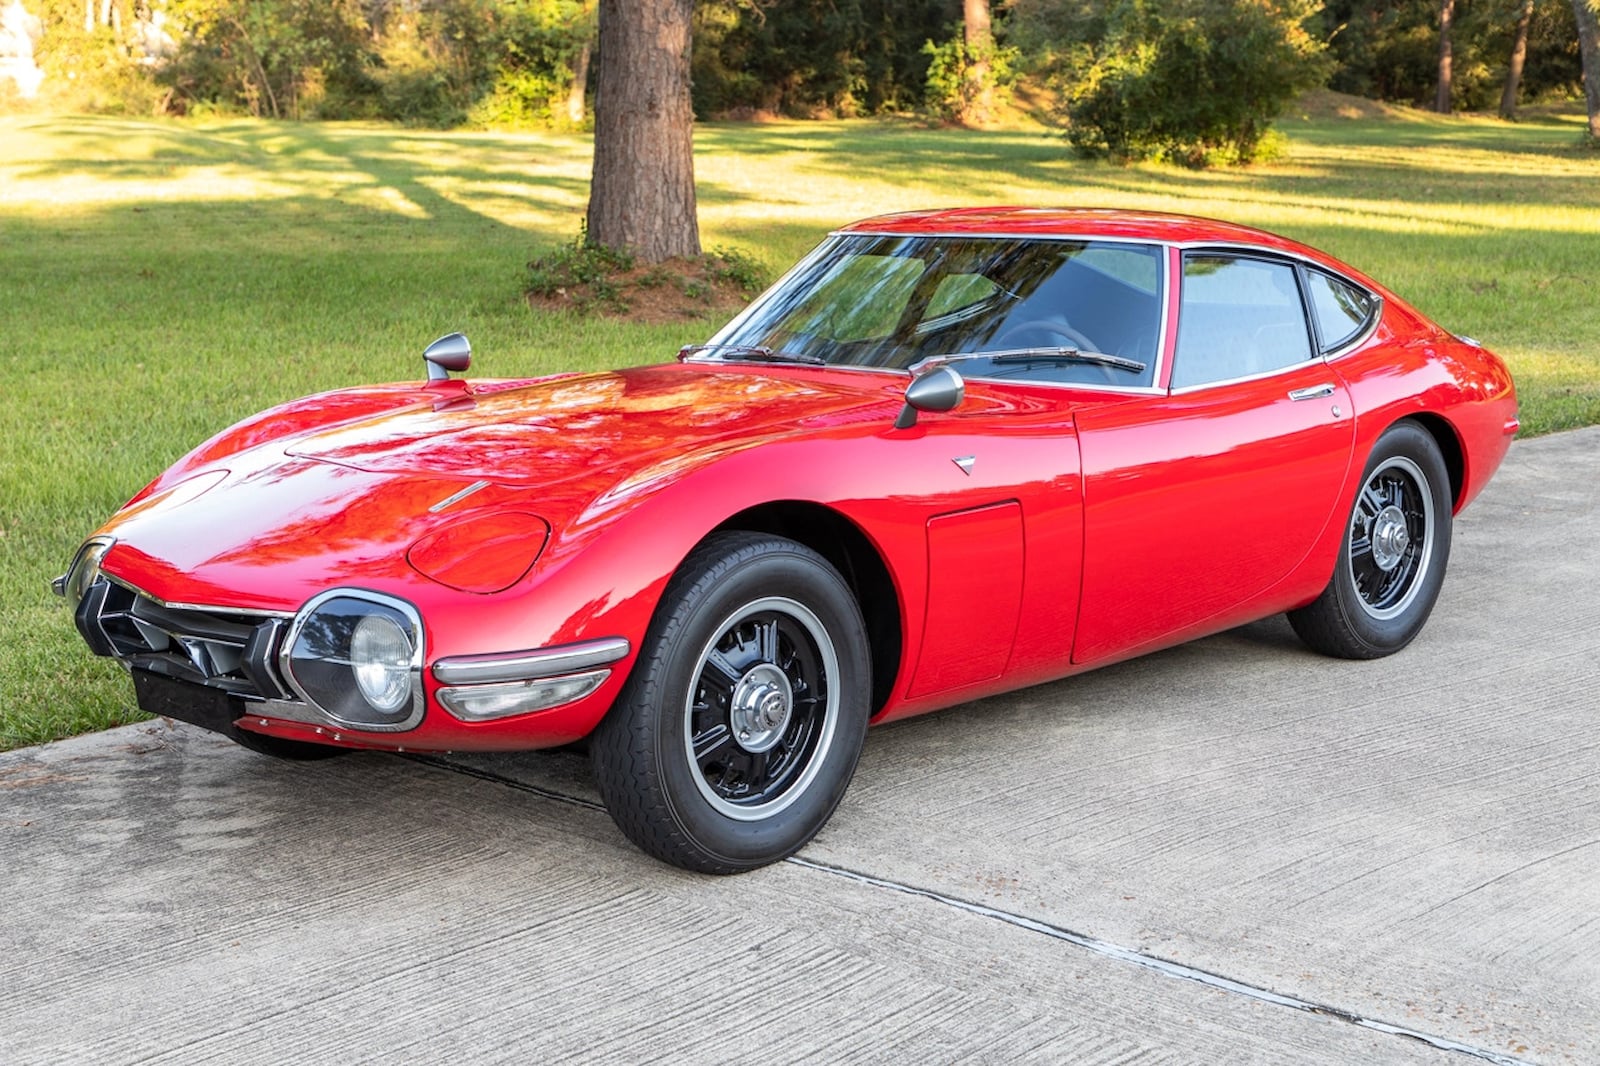 US-Titled Toyota 2000GT Will Sell For Record Price | CarBuzz